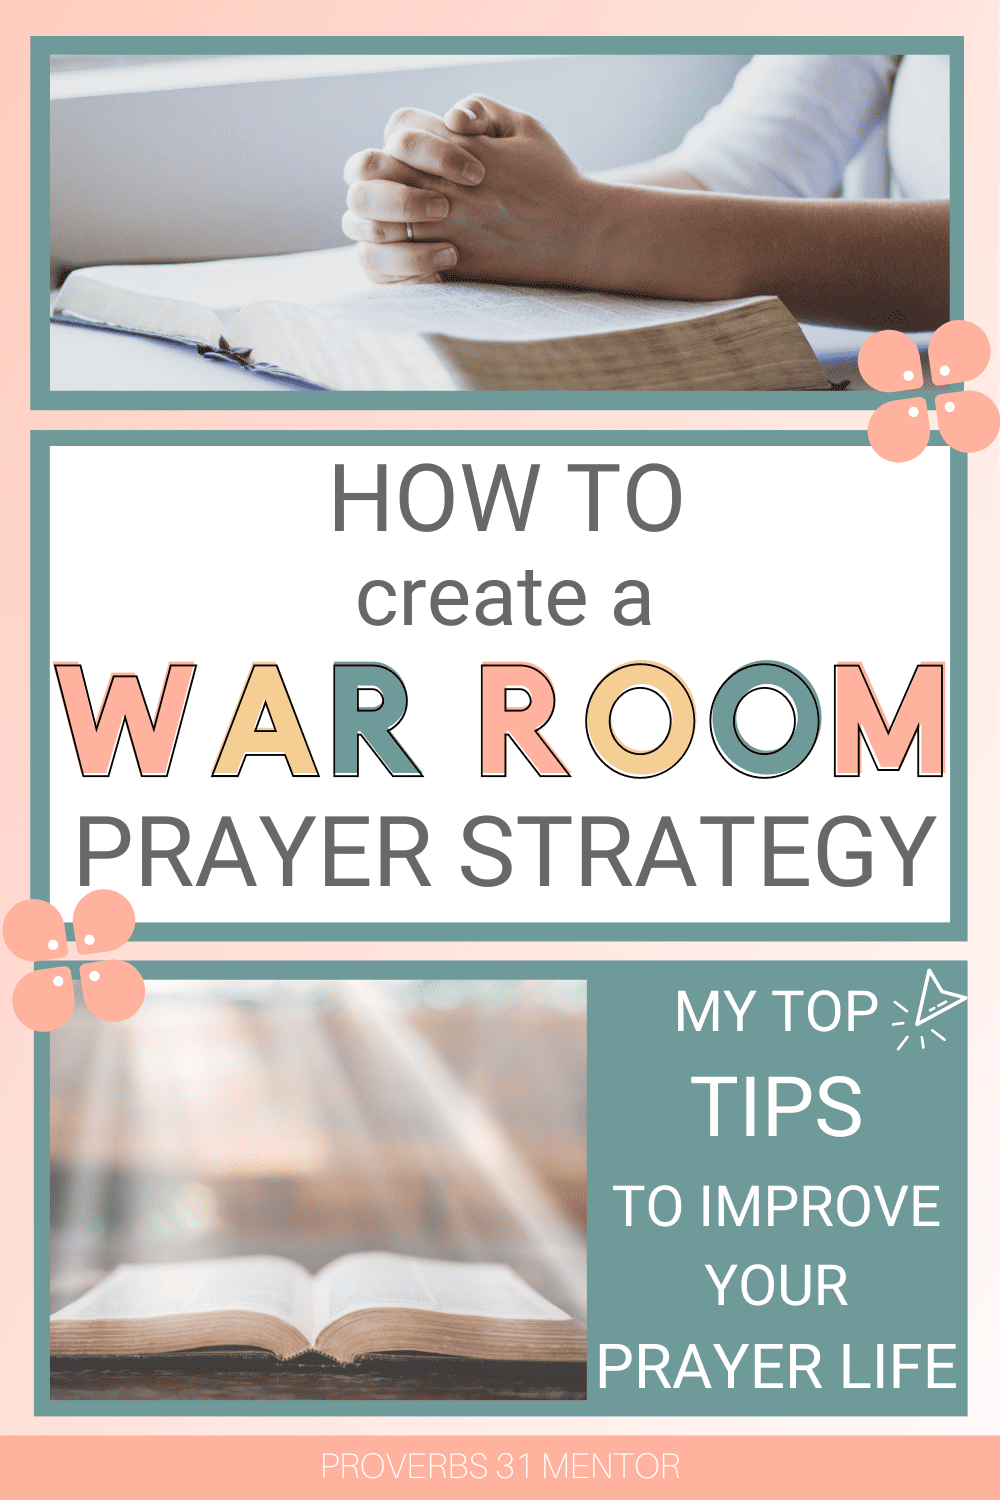 Title- How to Create a War Room Prayer Strategy Picture- open Bible with sun beaming down on it